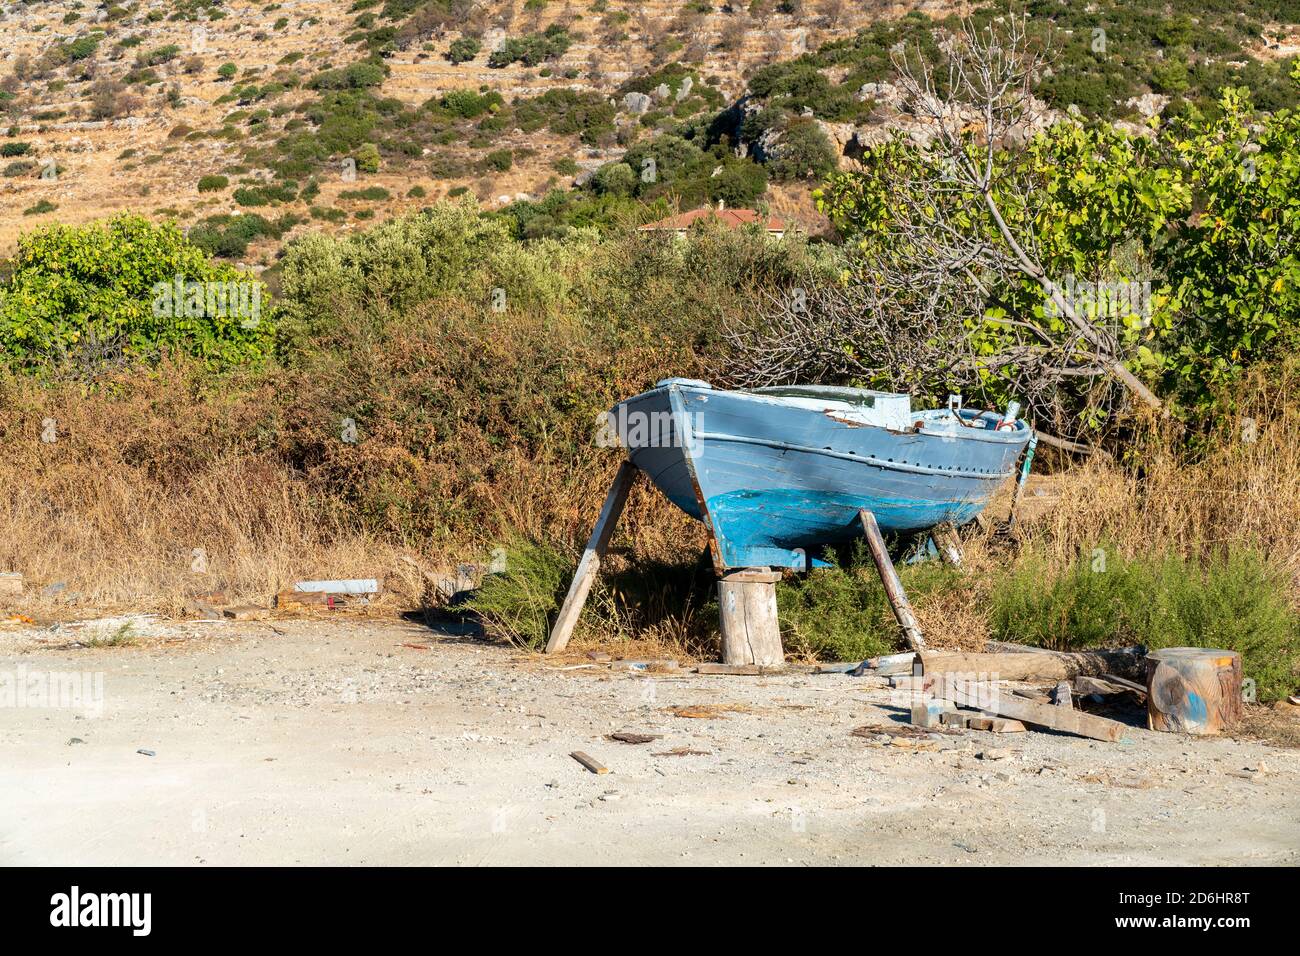 An abandoned little fisher boat discarded at land. The wood of the blue colored ship wreck looks very weathered. In the background green grass. Stock Photo